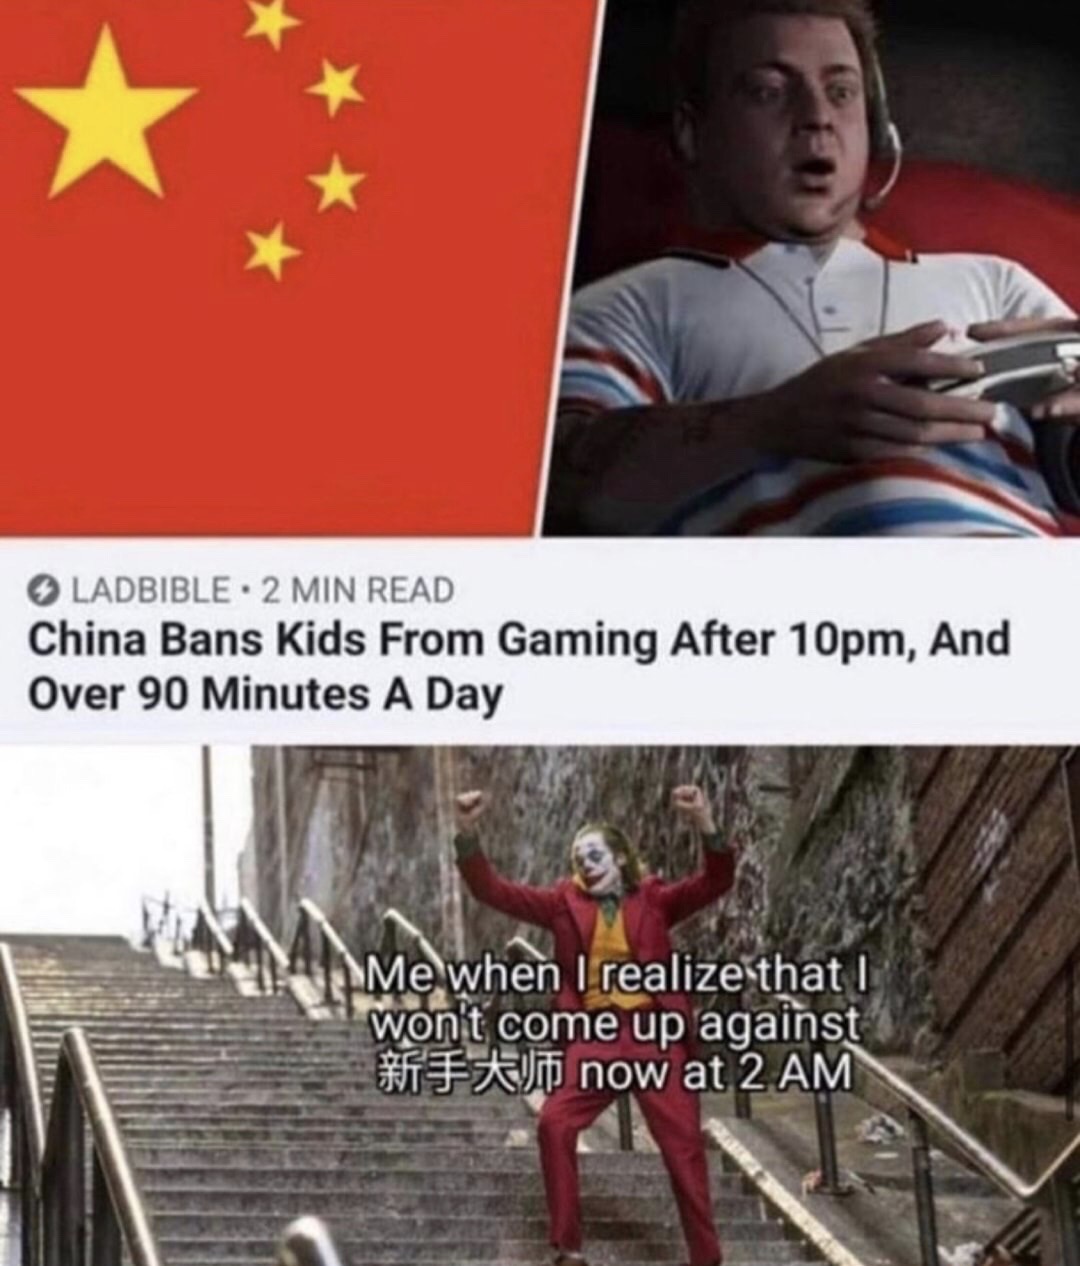 joker stairs - Ladbible 2 Min Read China Bans Kids From Gaming After 10pm, And Over 90 Minutes A Day Me when I realize that I won't come up against Favt now at 2 Am